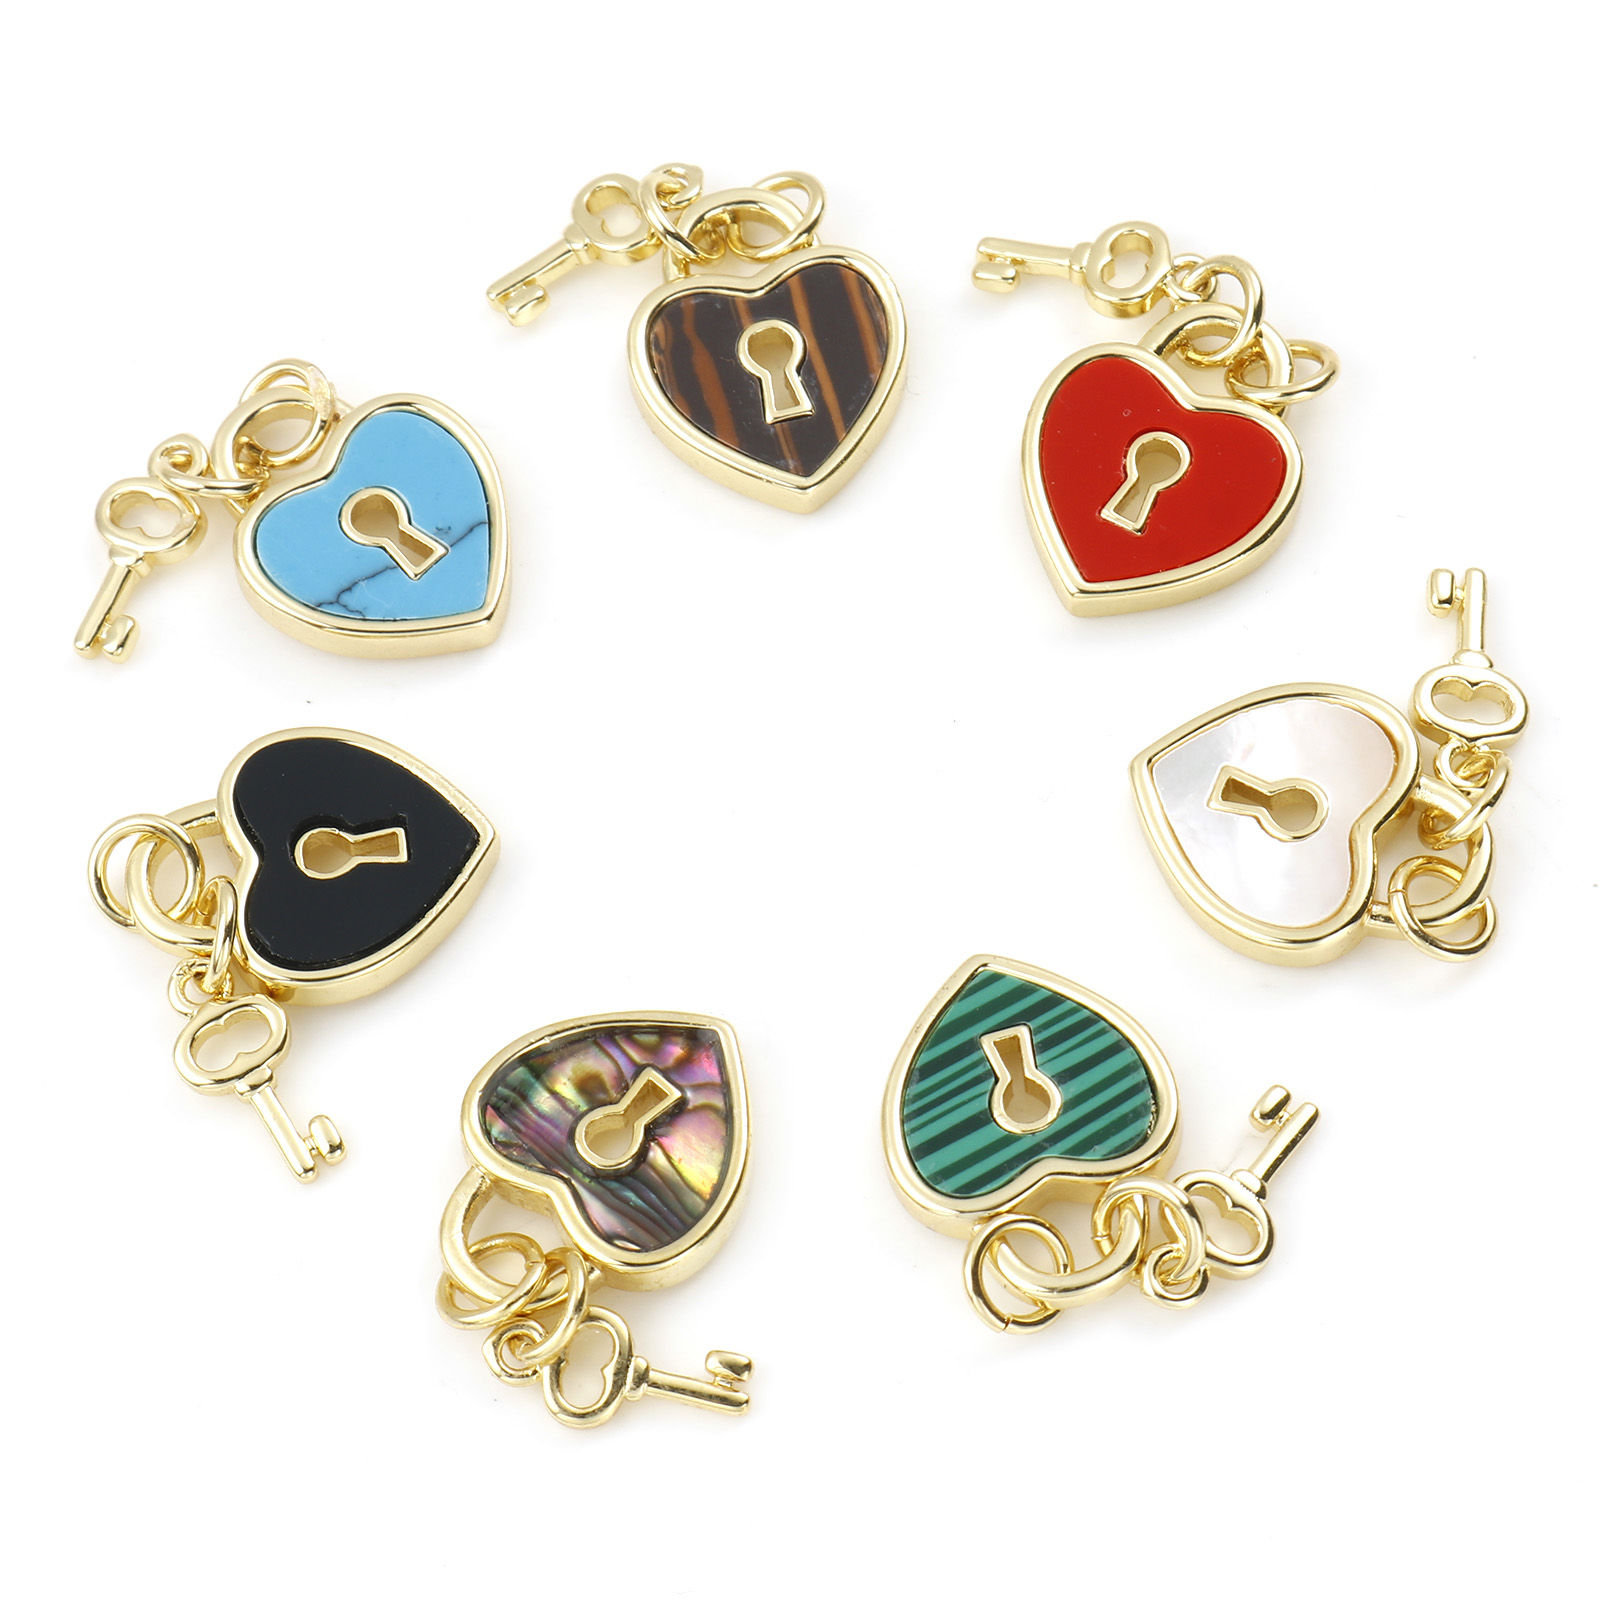 Image de Copper Valentine's Day Charms Gold Plated Multicolor Heart Lock With Synthetic Gemstone Cabochons 18mm x 12mm, 1 Piece